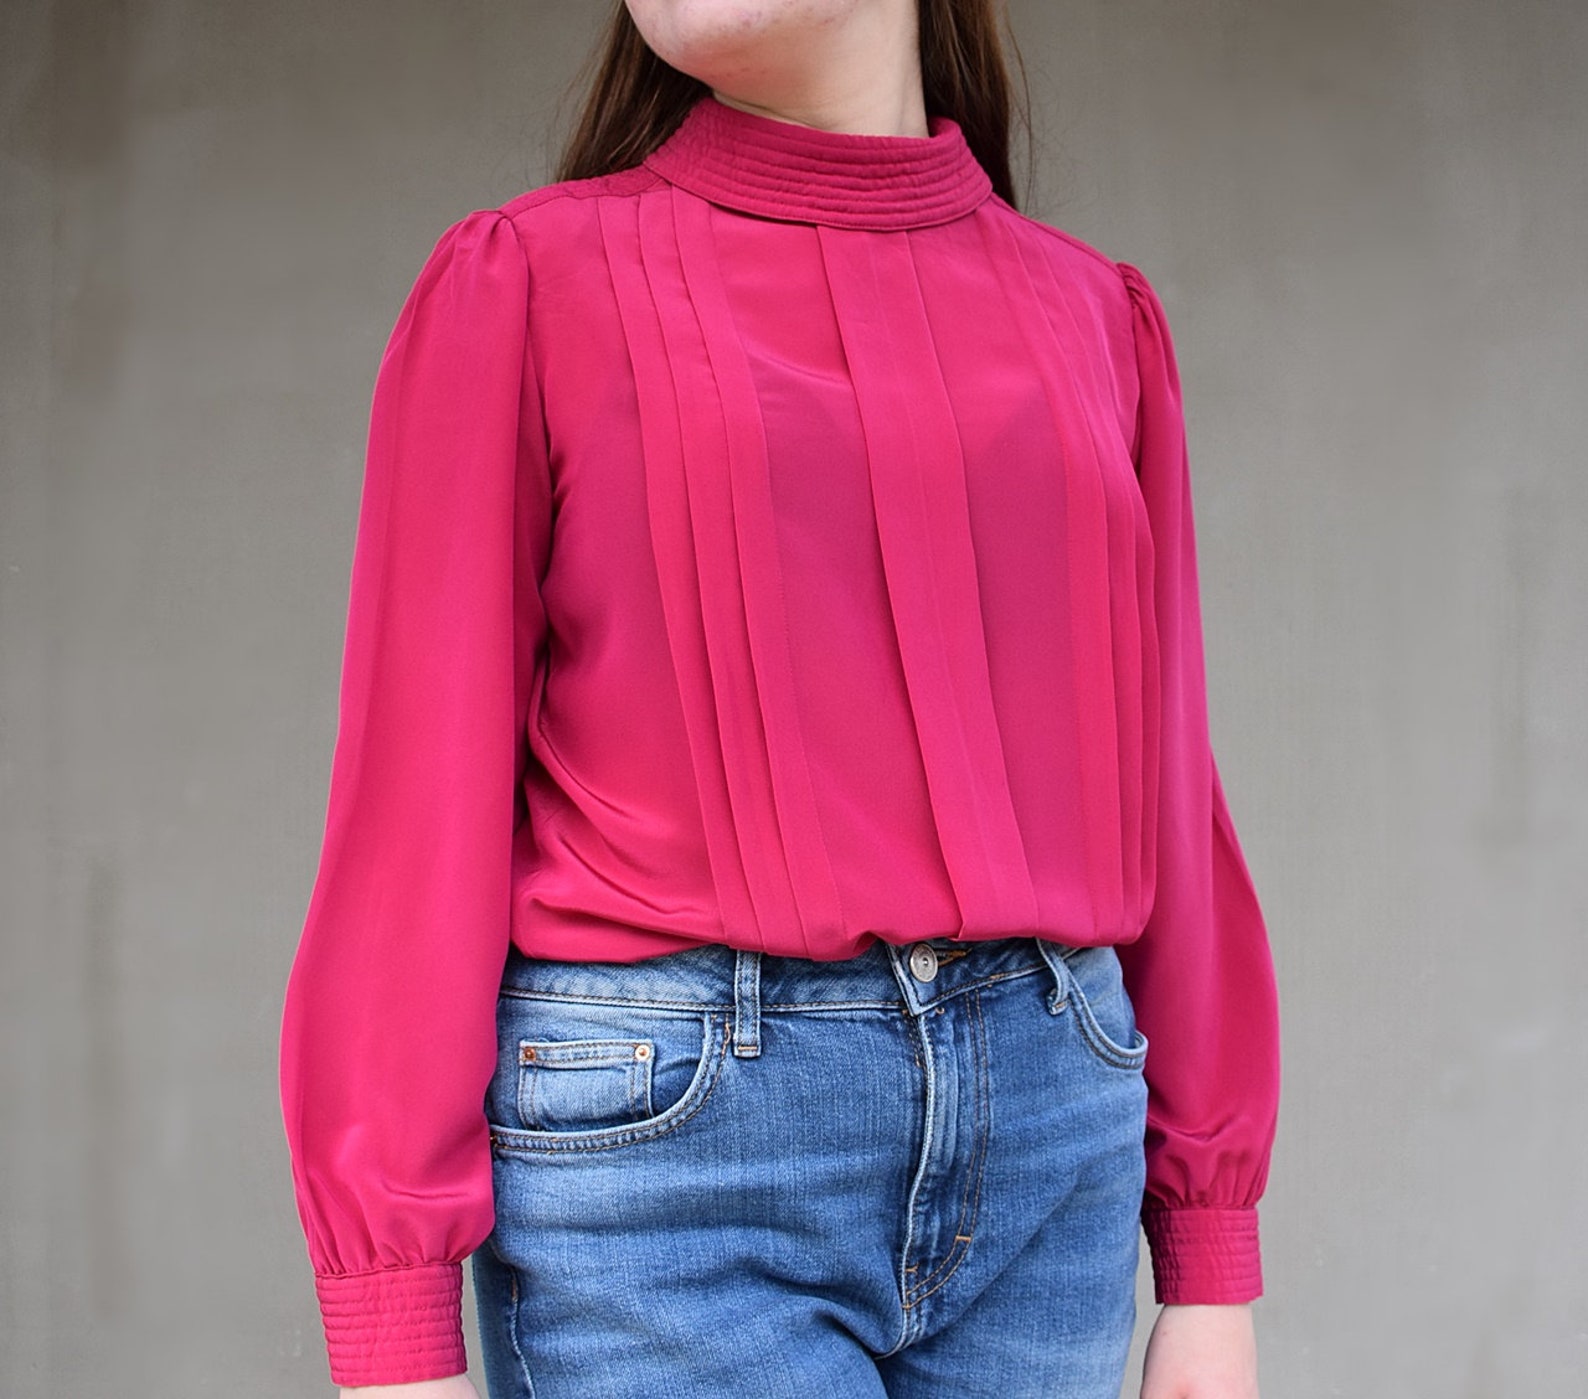 Vintage Cyclamen Blouse With Shoulder Pads 1970s 70s Woman - Etsy